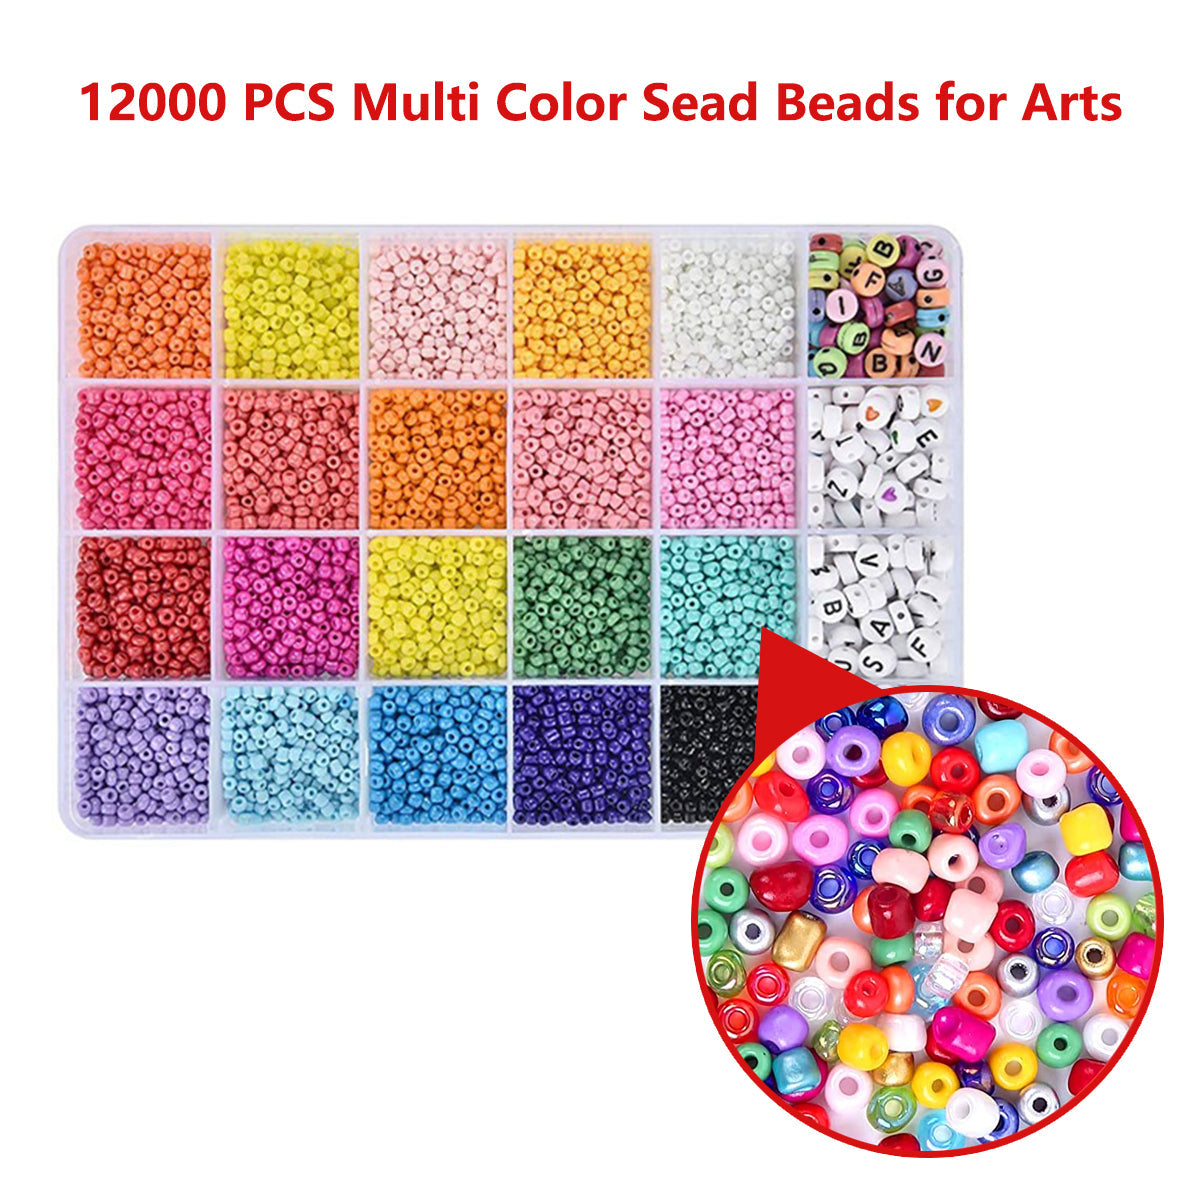 24 Grids Candy Color Diy Handmade Beads with Square Letter Beads for Jewelry Making, Necklaces, Bracelets (1200pcs)